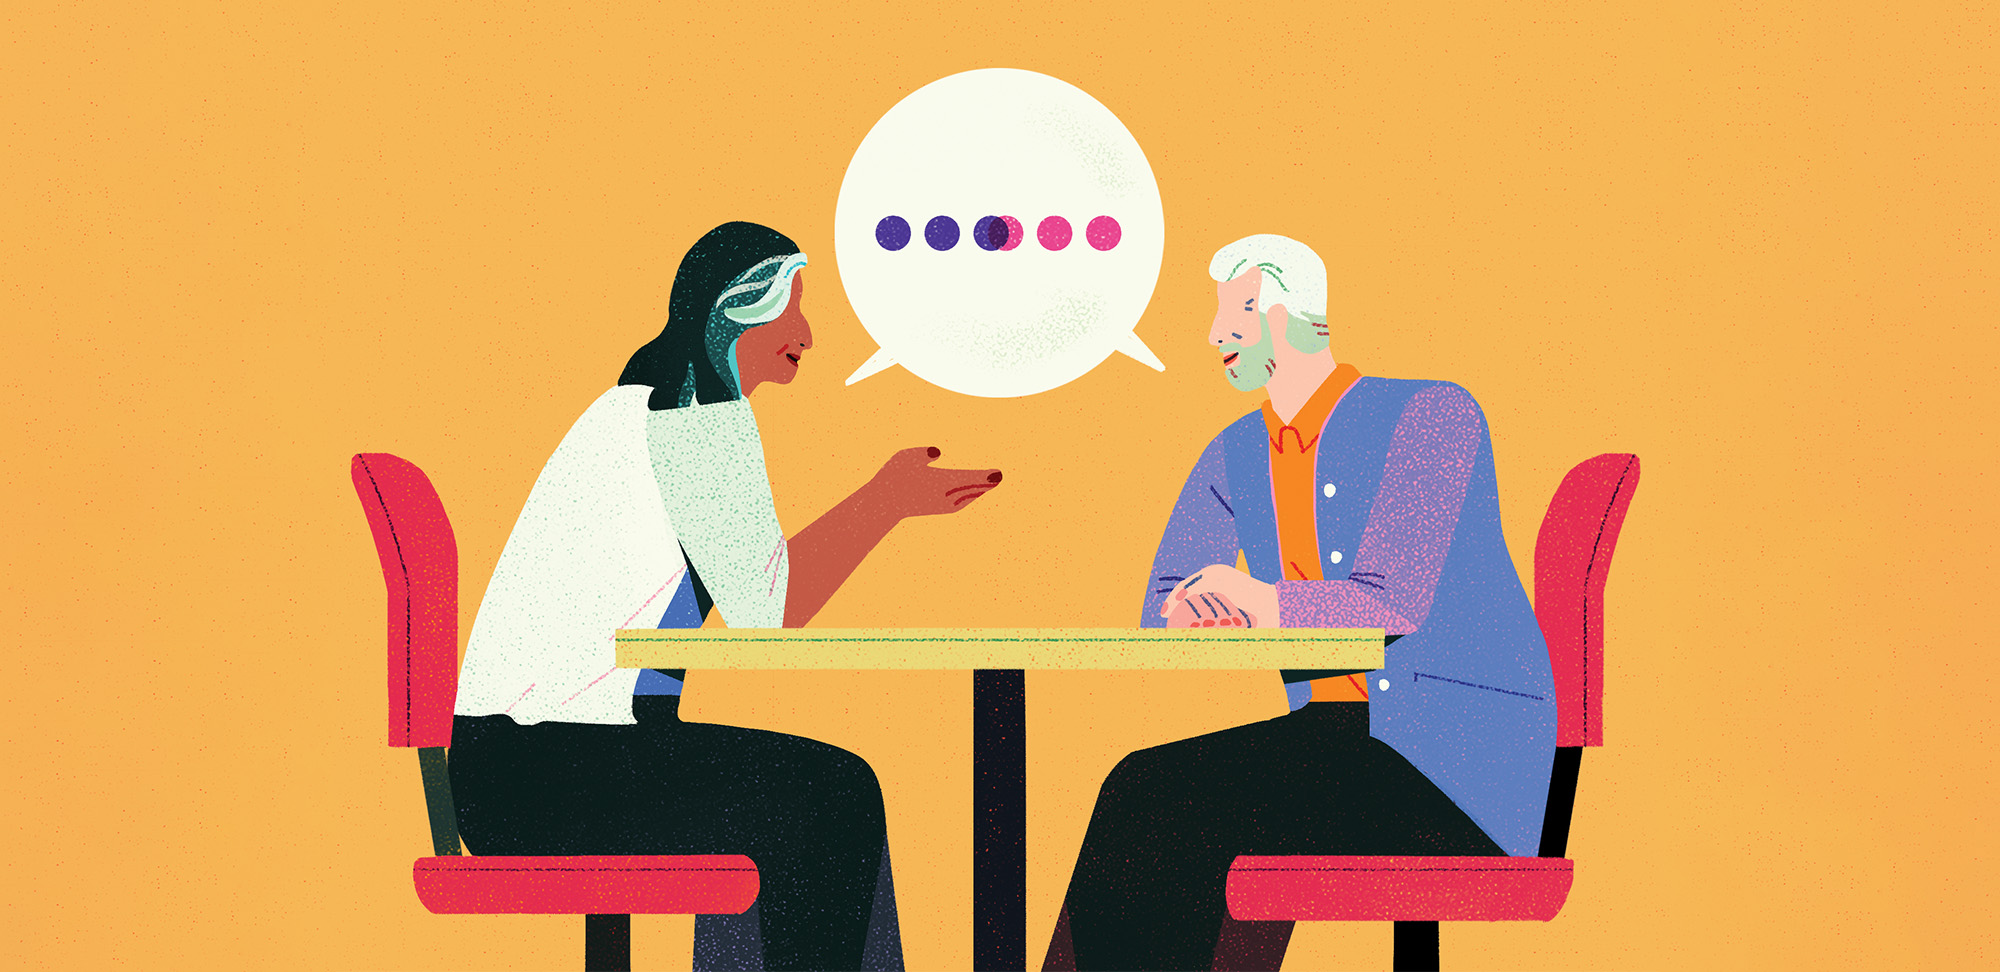 Illustration of a woman talking to a man at a table